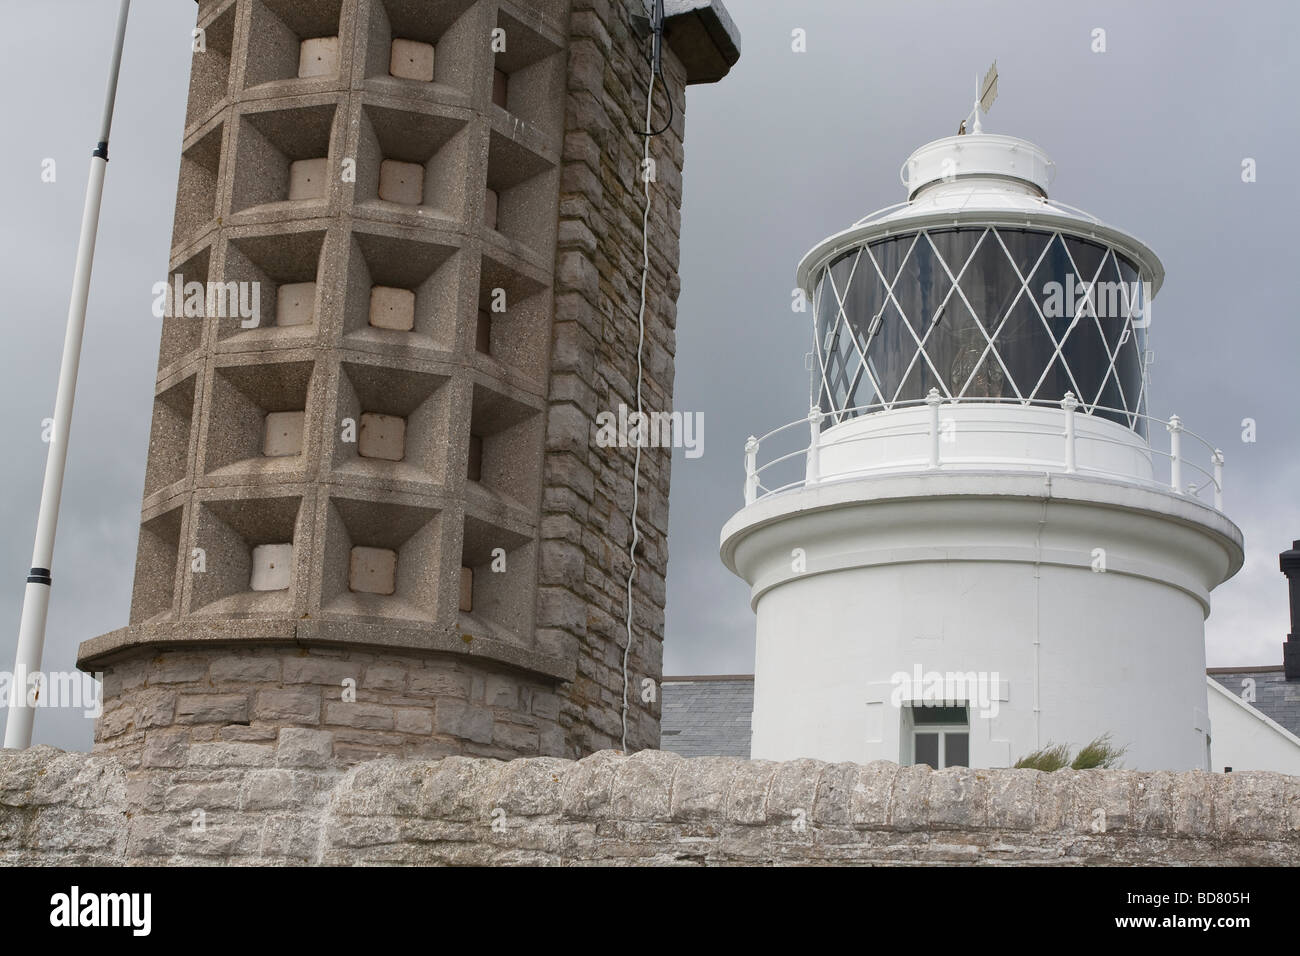 The foghorn and main tower of Anvil Point Lighthouse, Dorset, UK Stock Photo